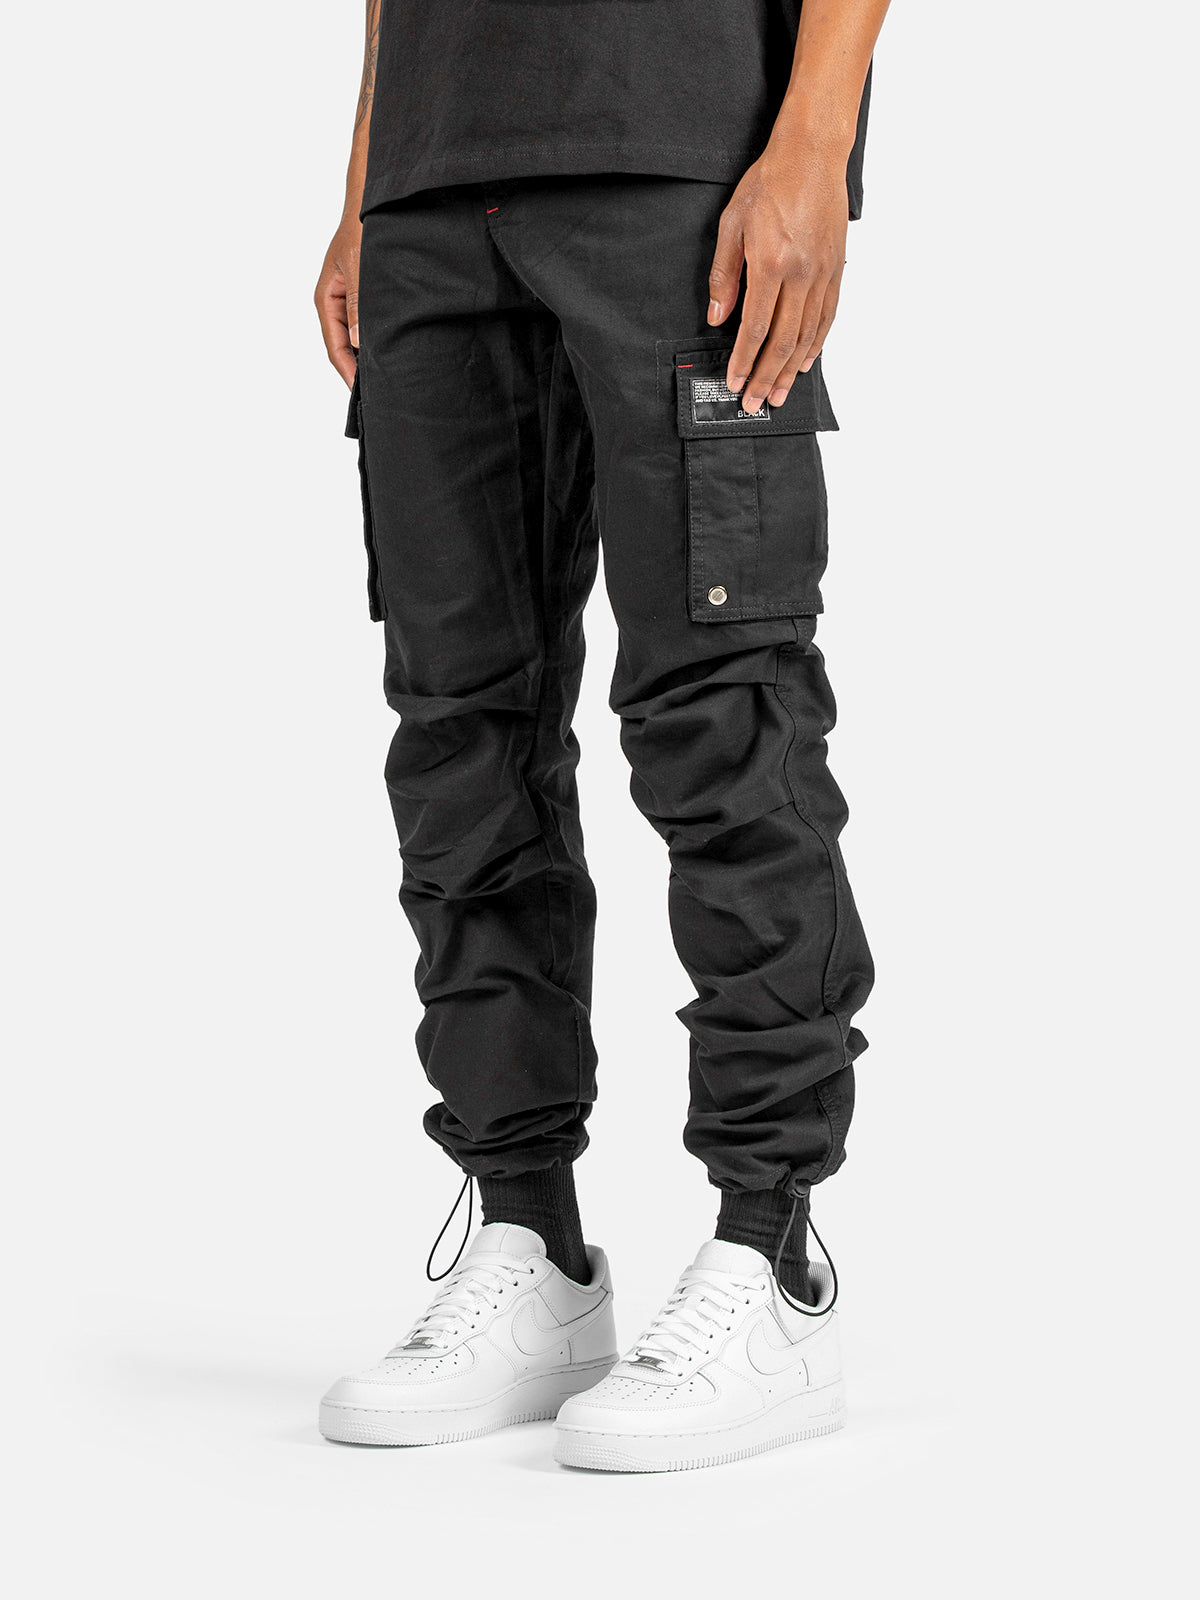 CARGO PANTS ARE A PART OF THE HOTTEST MEN'S FASHION TRENDS OF 2021 - AKINGS